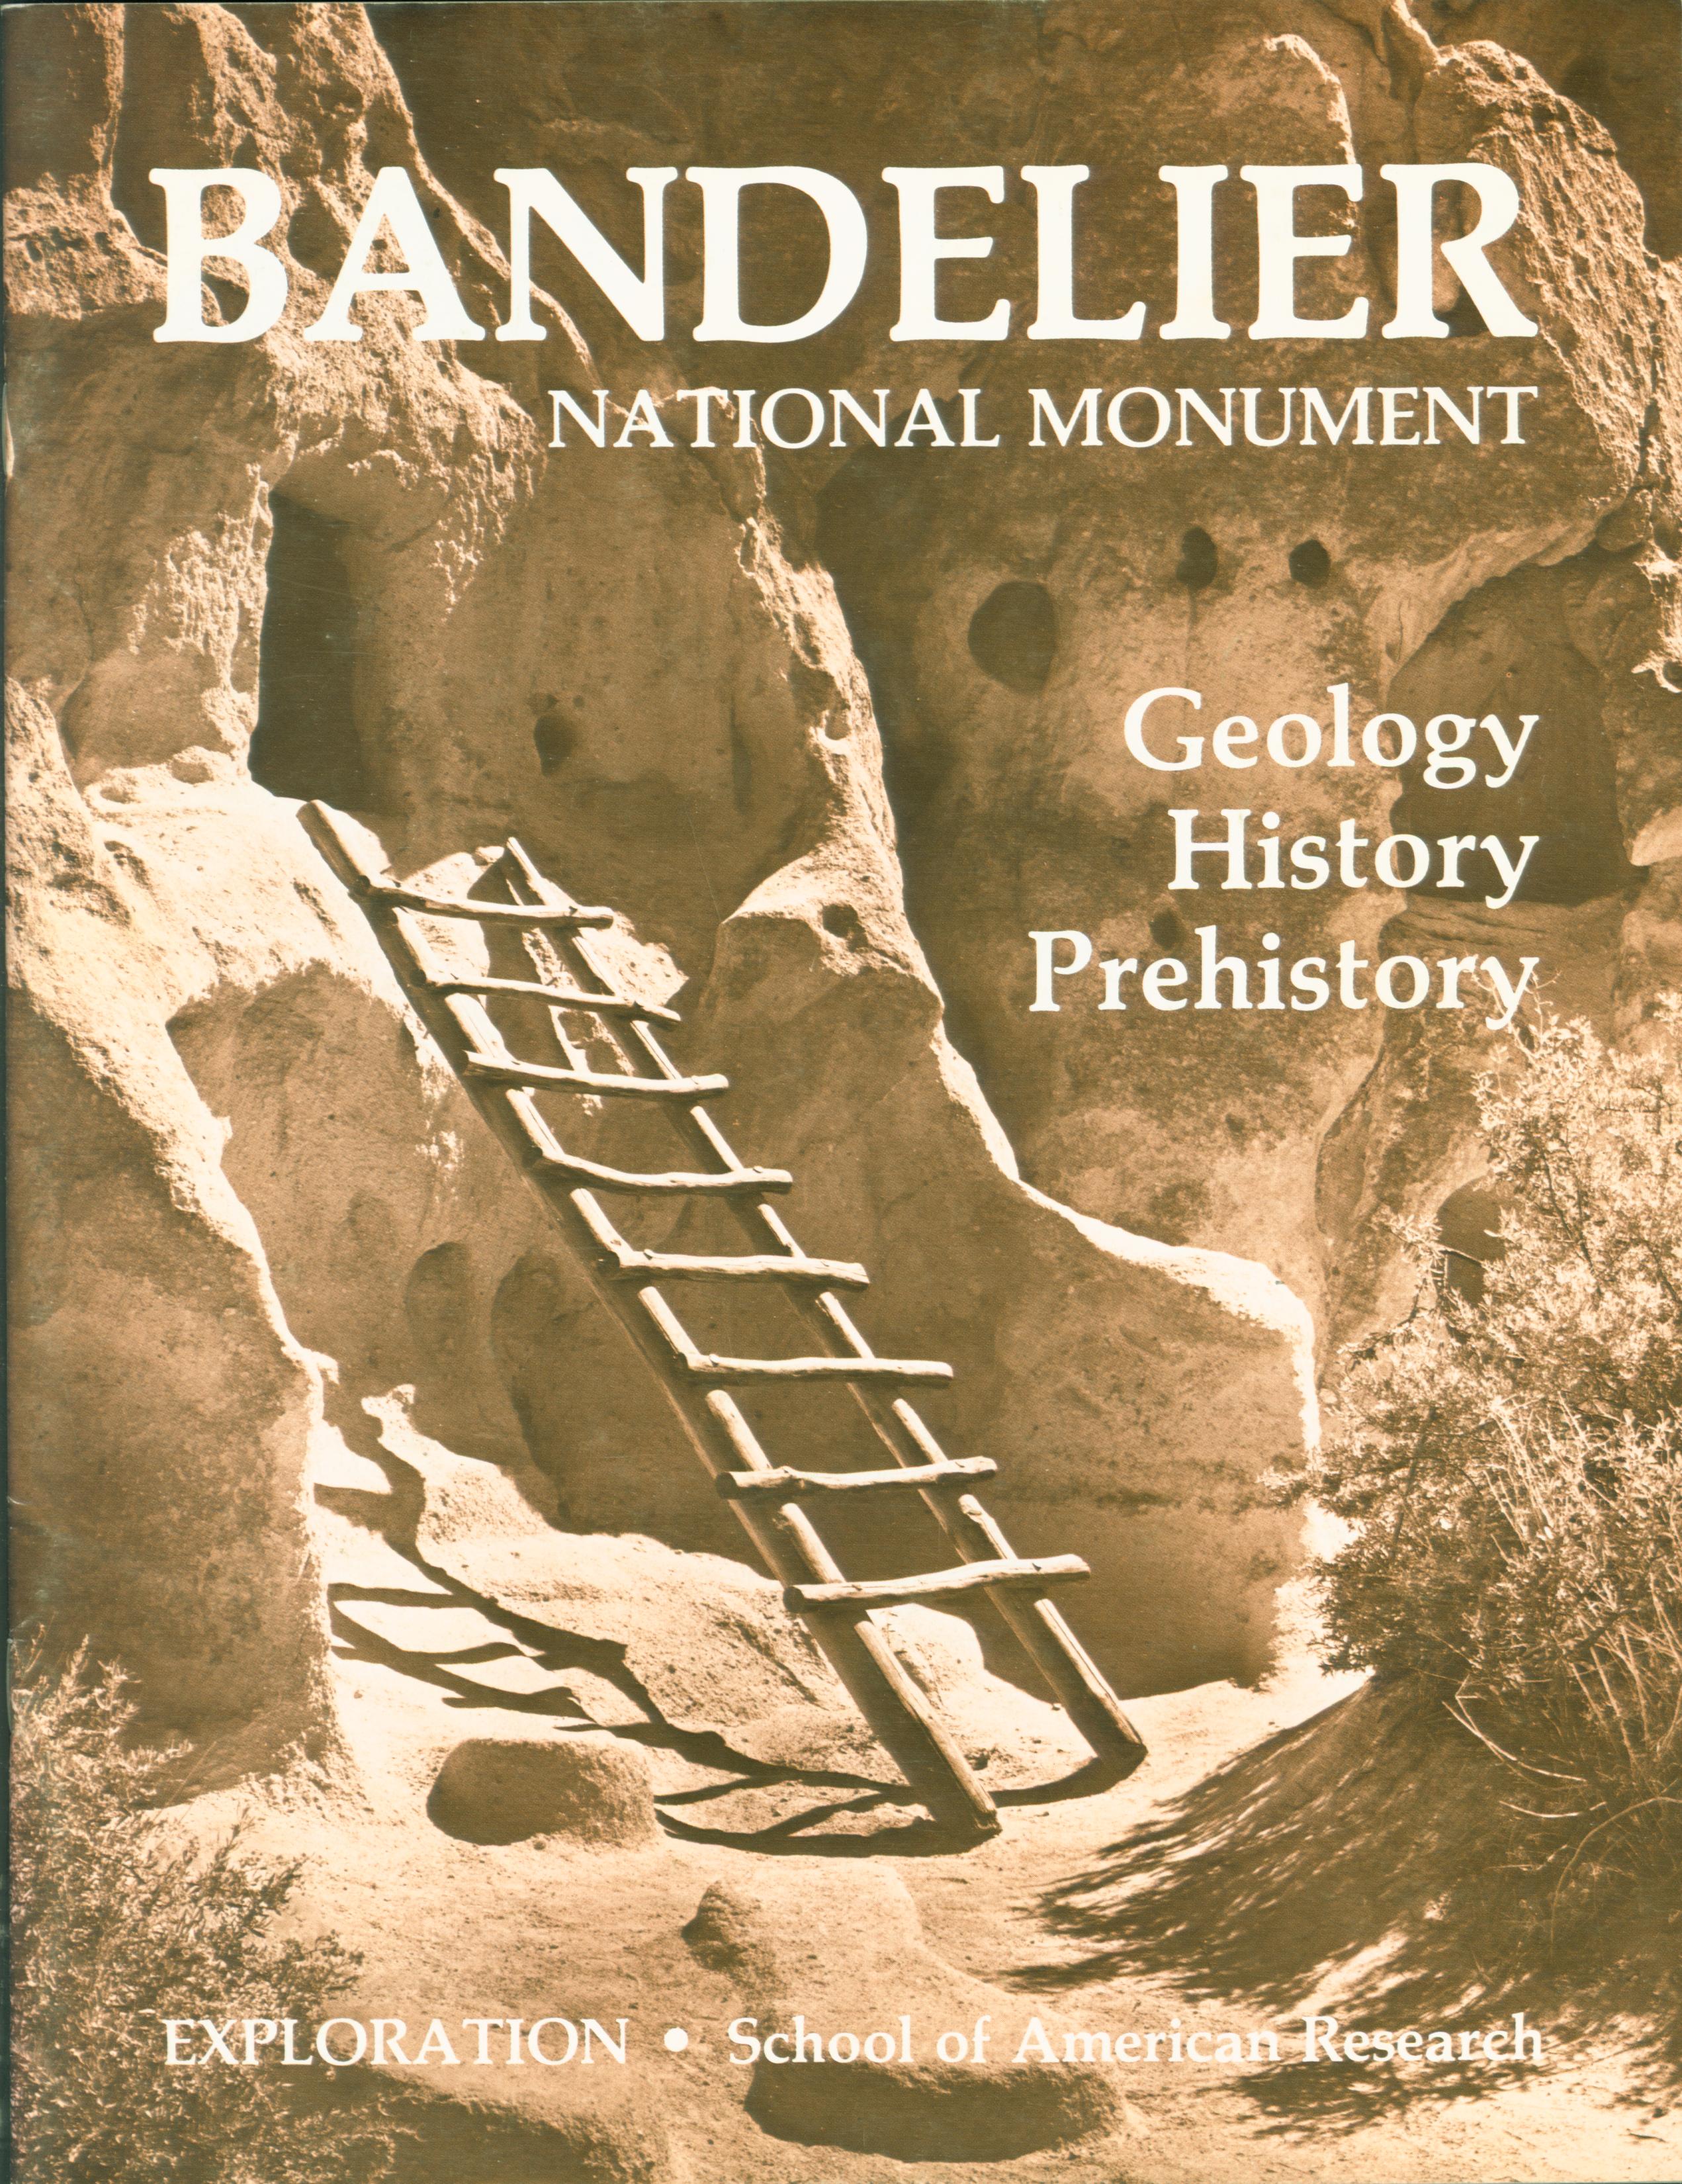 BANDELIER NATIONAL MONUMENT: geology, history, prehistory. 